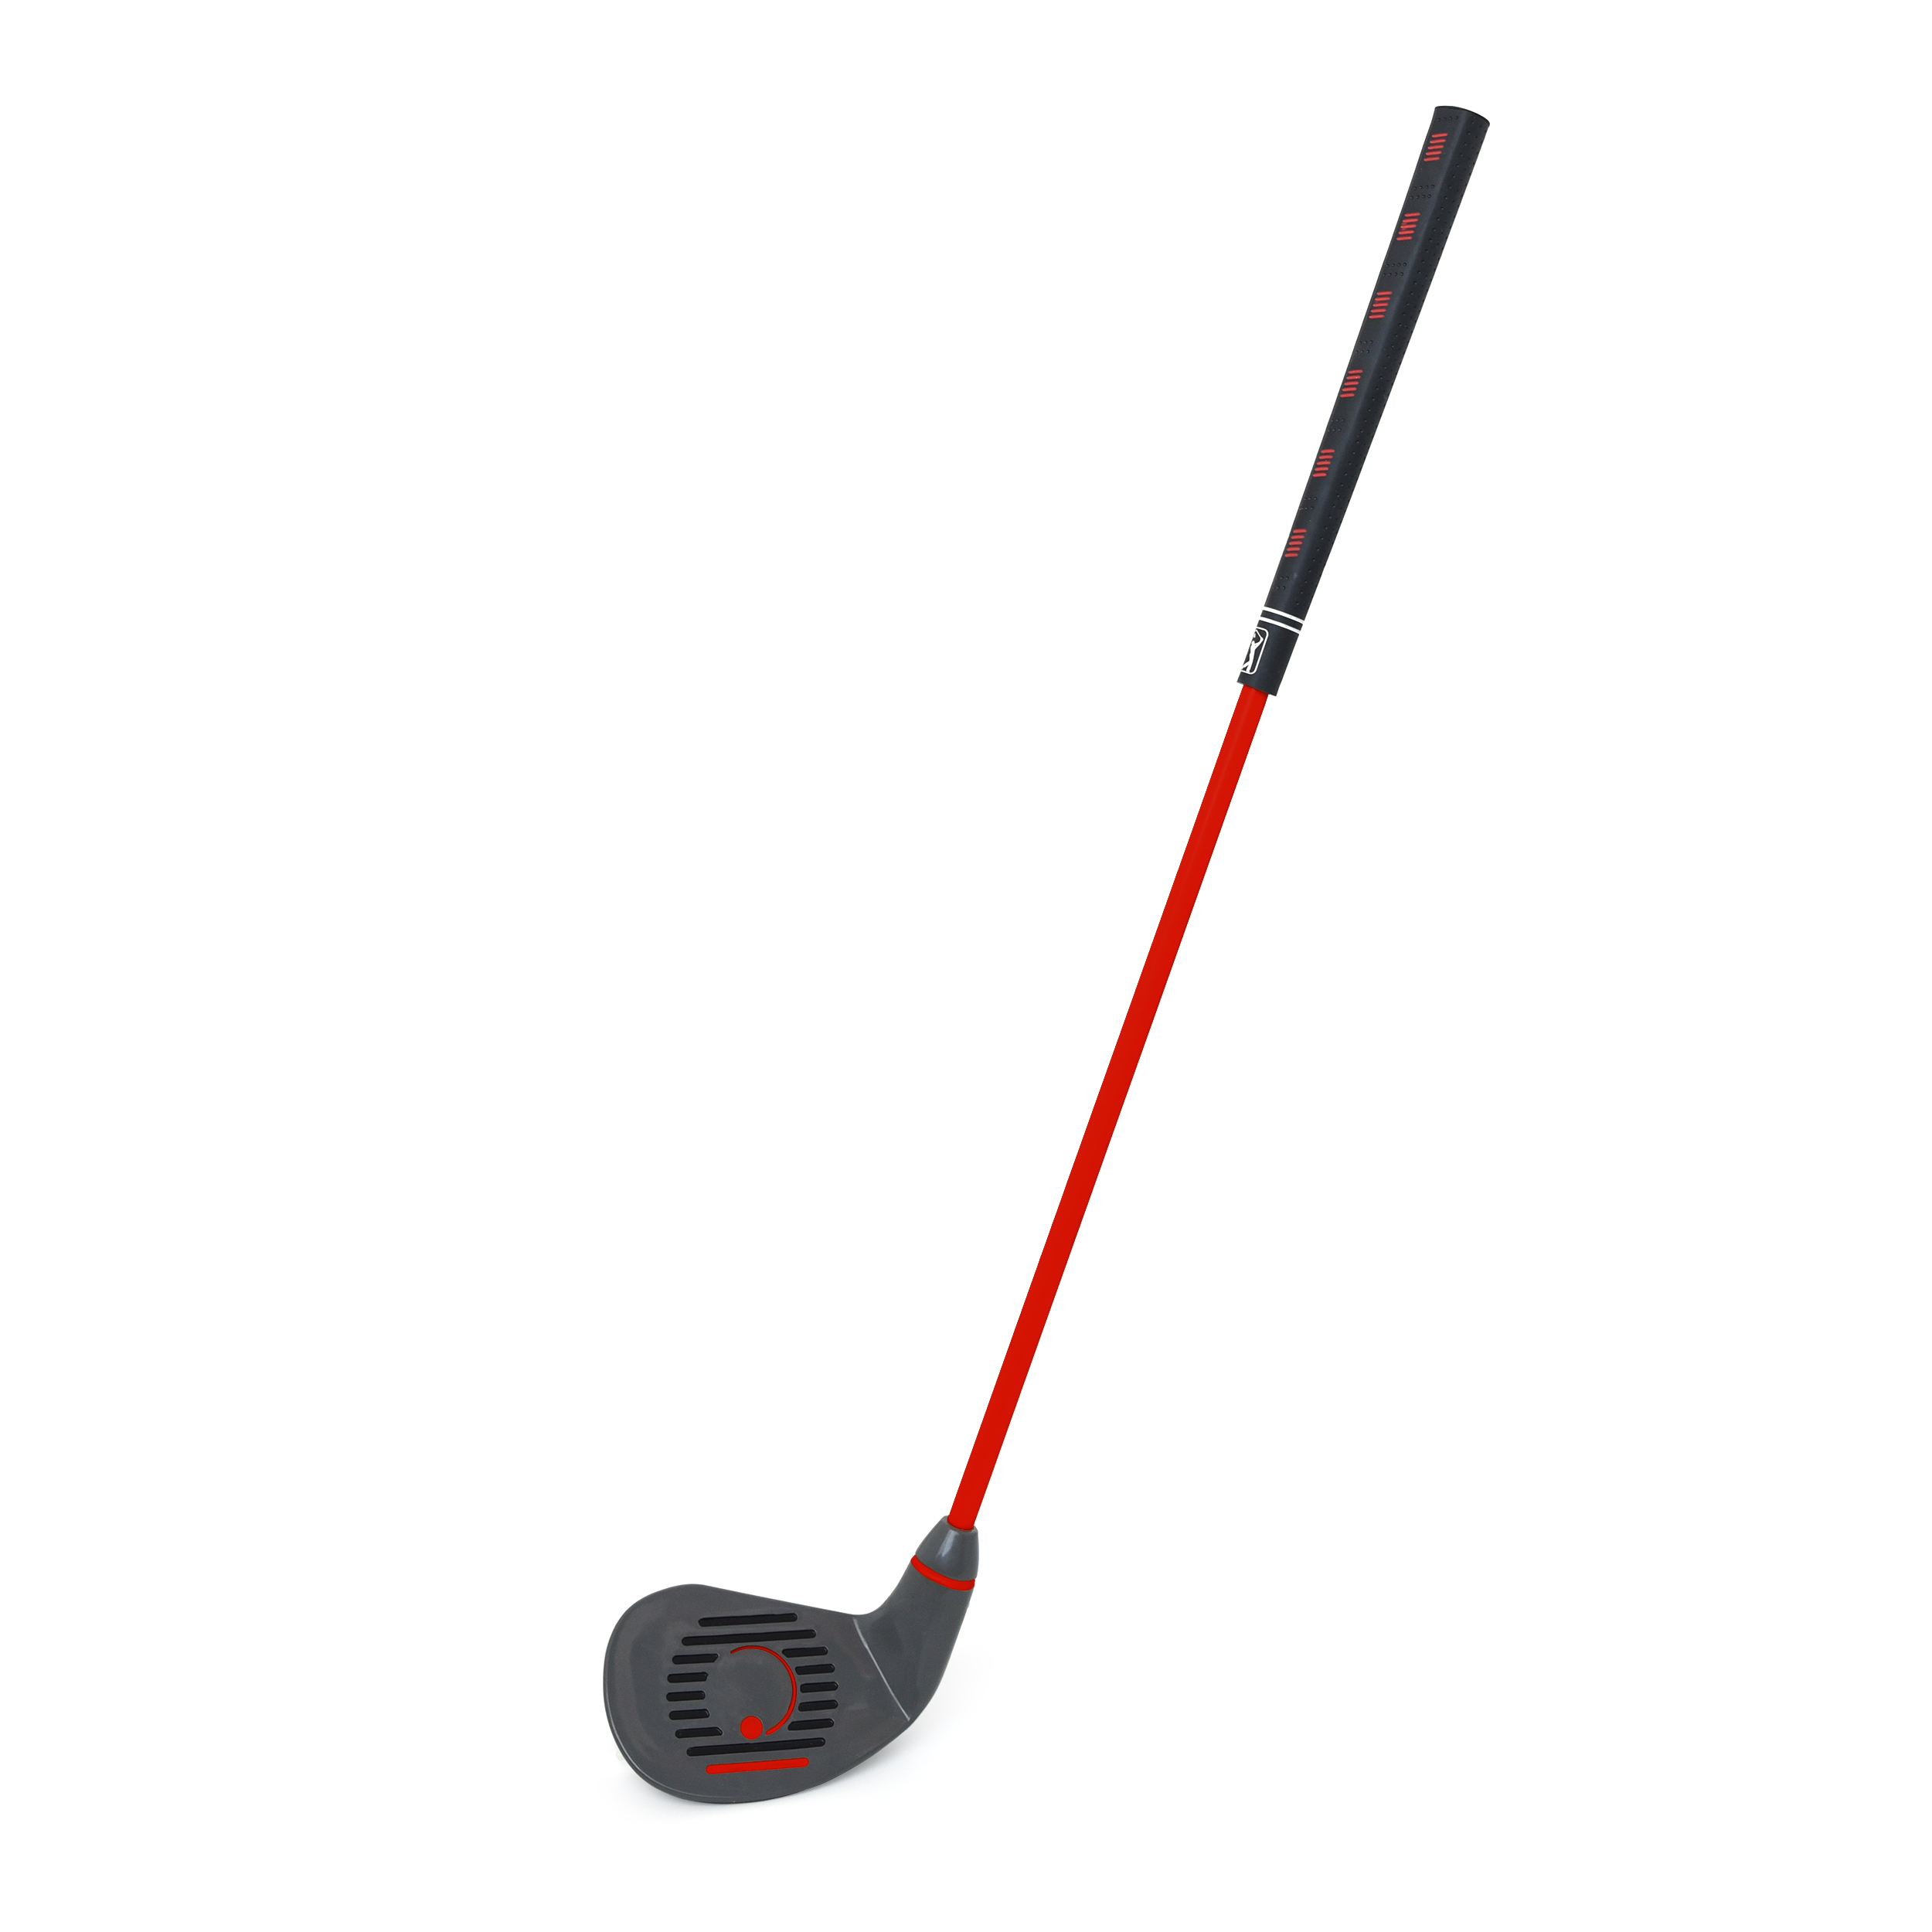 PGA Tour Tee-Up Kids Iron Golf Club, Small, Red Right Handed Dexterity - image 3 of 7